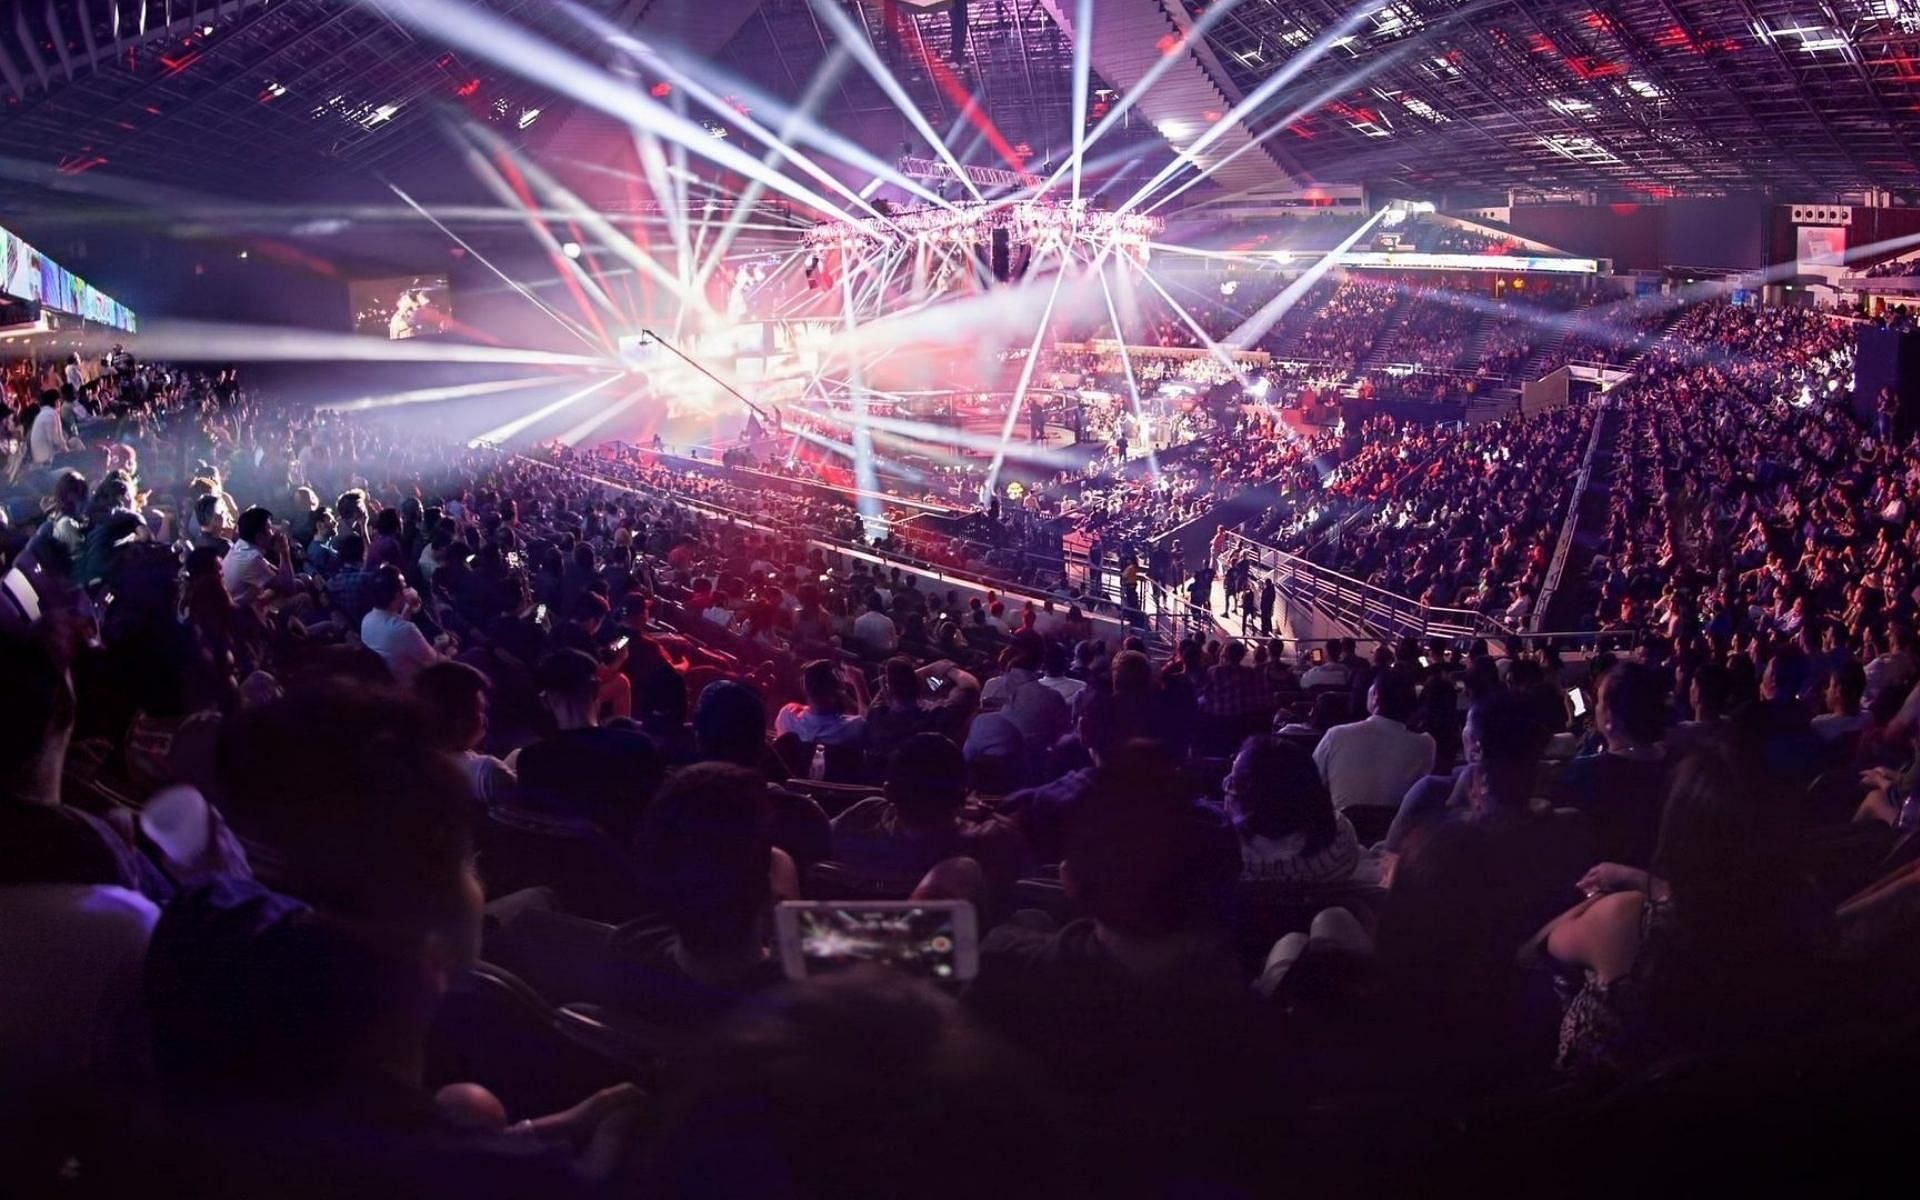 ONE Championship live crowds might come back in 2022. (Image courtesy of ONE Championship)